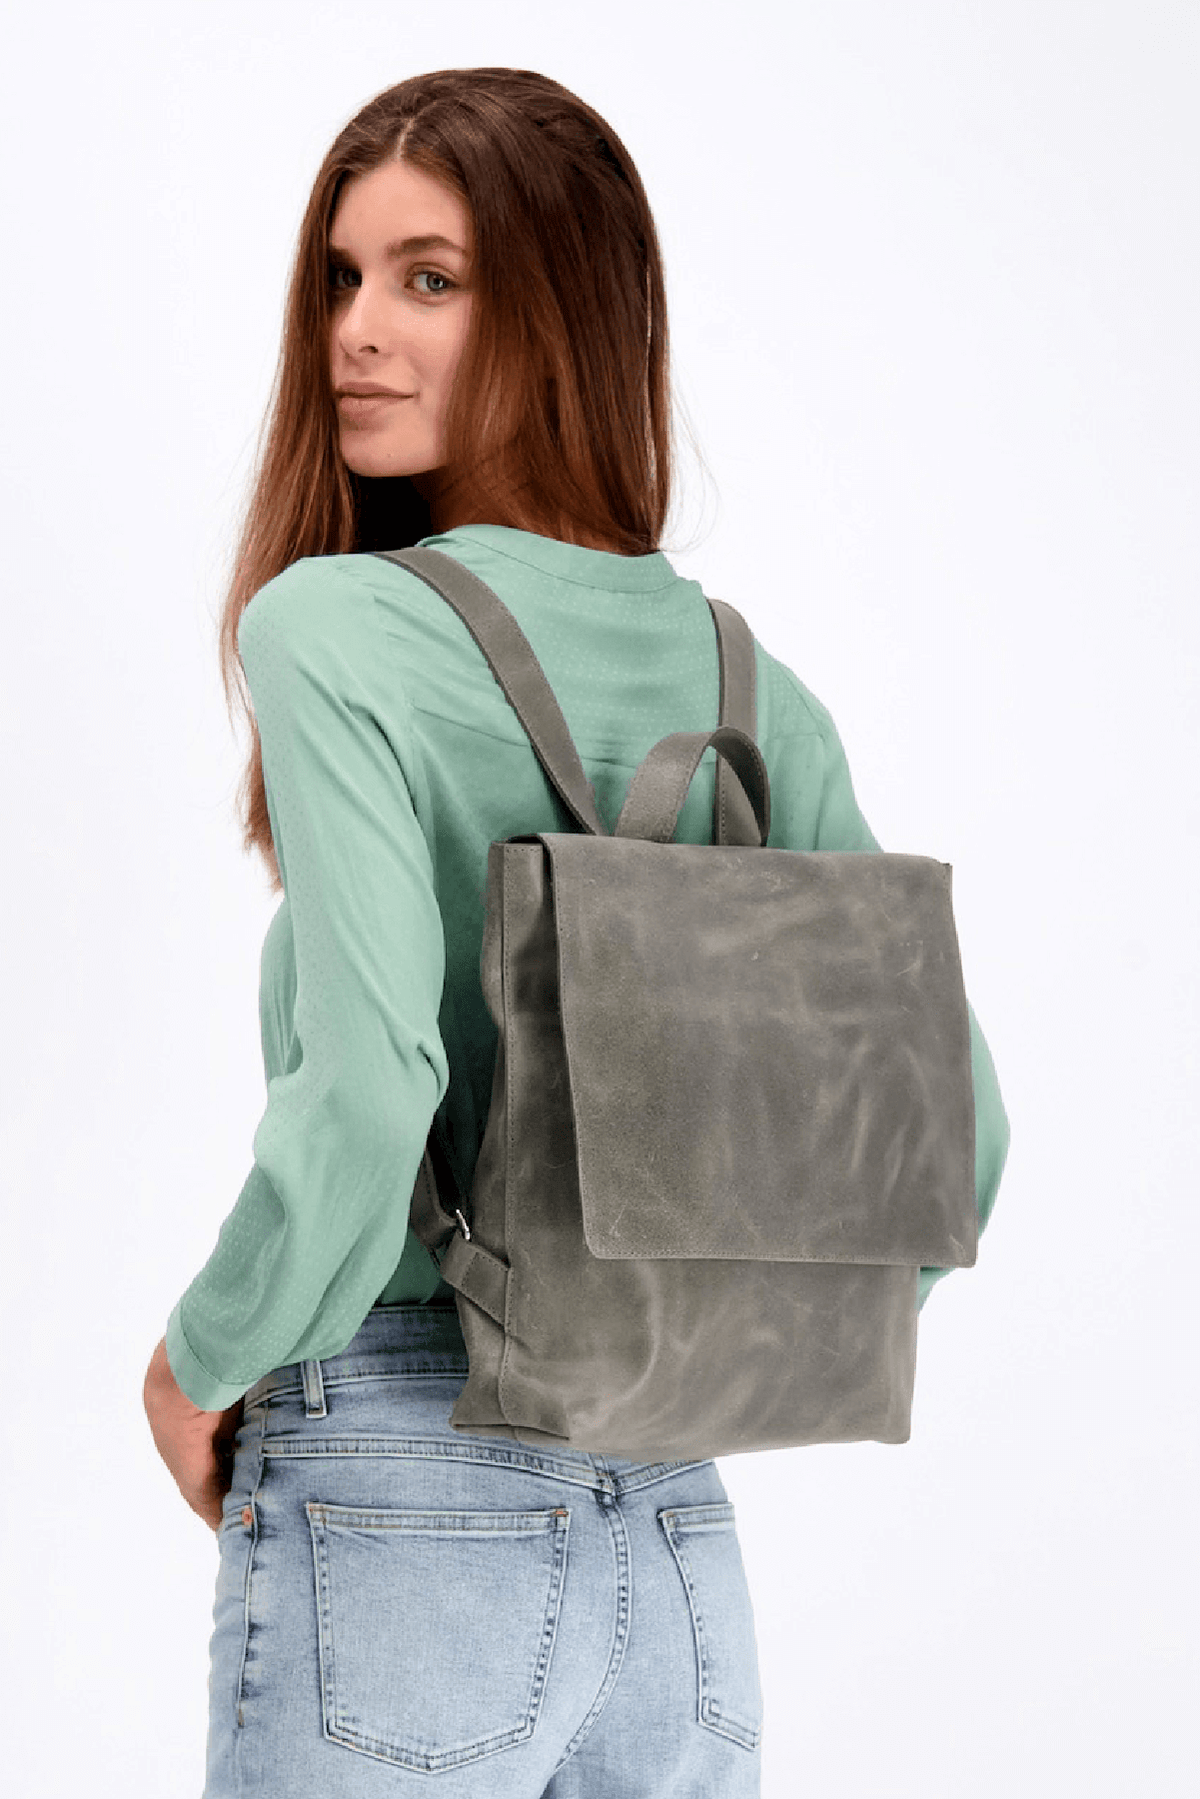 Buy Women Backpack Purse Online In India - Etsy India